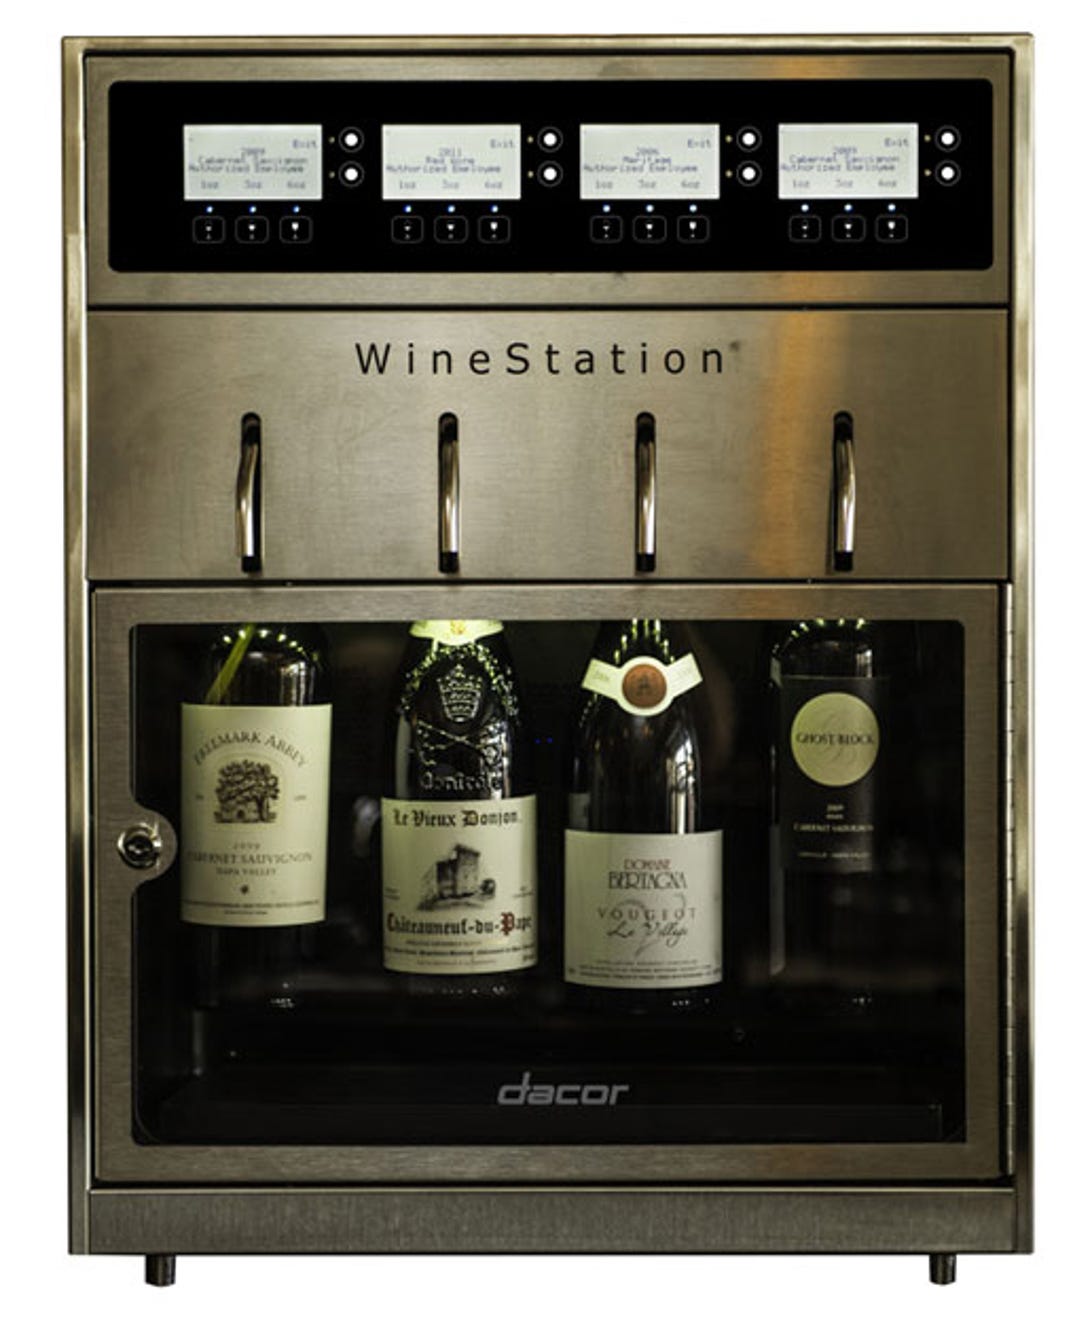 The Dacor Discovery DYWS4 WineStation lets users pick and choose to find the perfect glass for the moment.